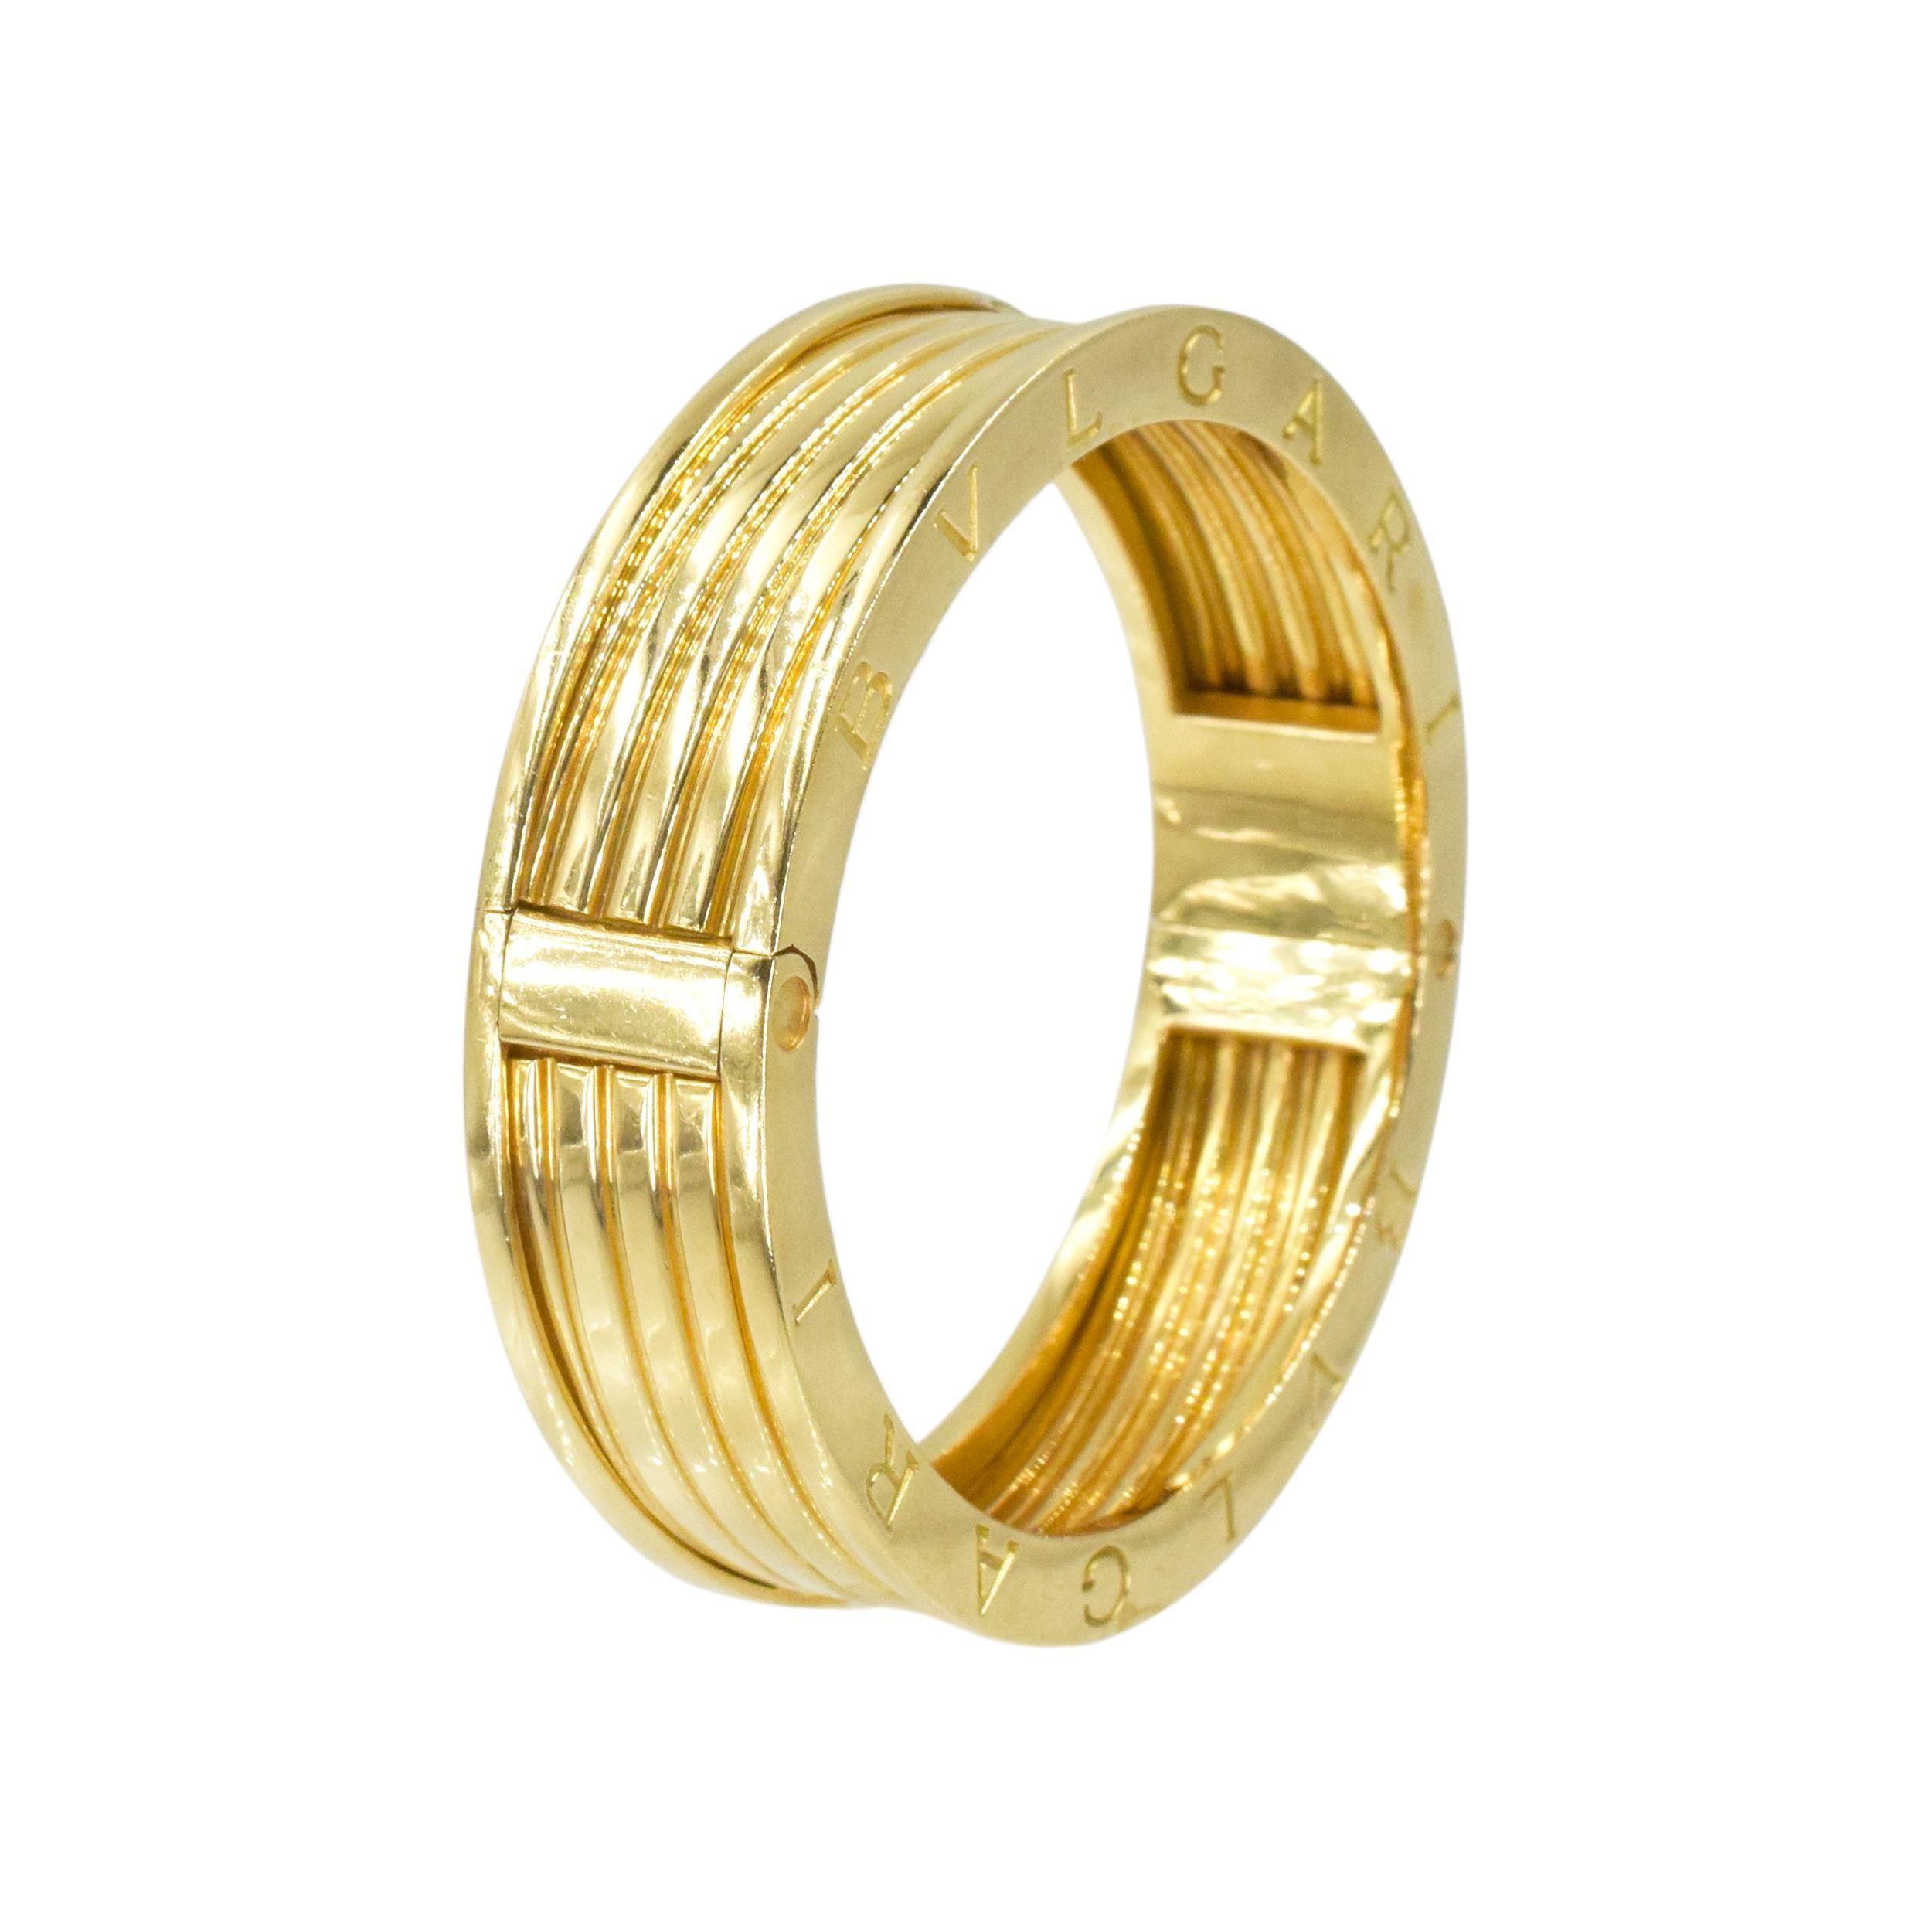 One of the most popular collections of the house of Bvlgari is the B.zero, Inspired in the Coliseum
Bvlgari B Zero1 Bangle bracelet in 18k yellow gold. The bracelet features the signature design with BVLGARI
etched on the edges. Crafted in 18k